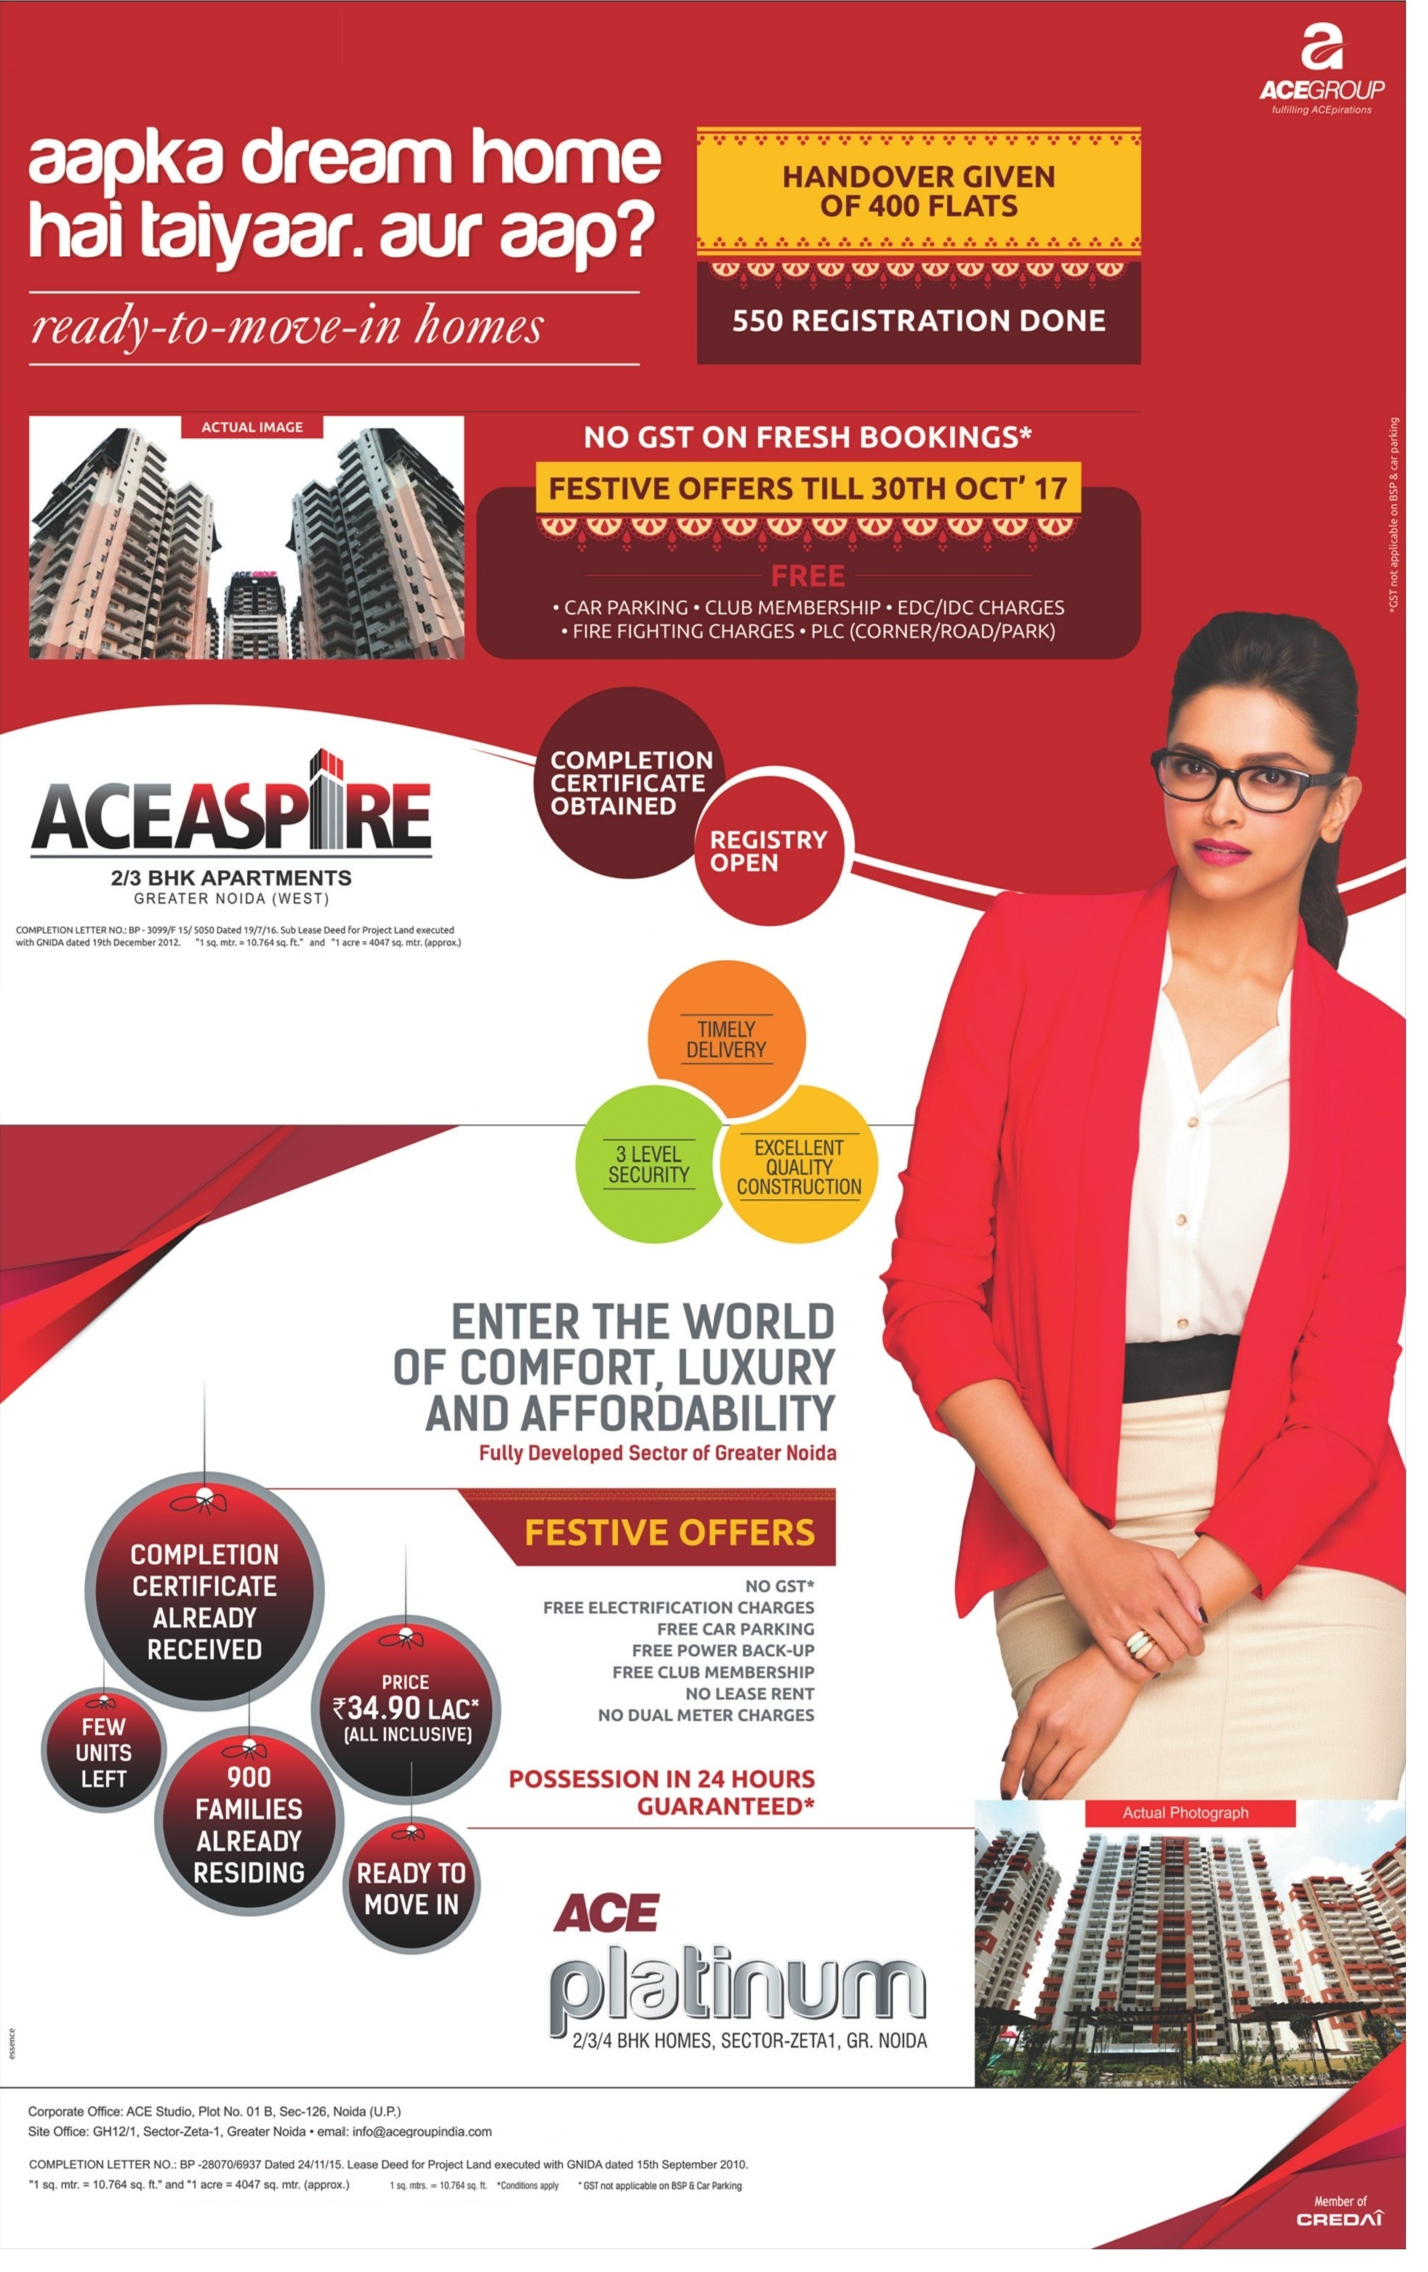 Enter The World  of Comfort, Luxury and Affordable at ACE Aspire and ACE Platinum in Greater Noida West Update